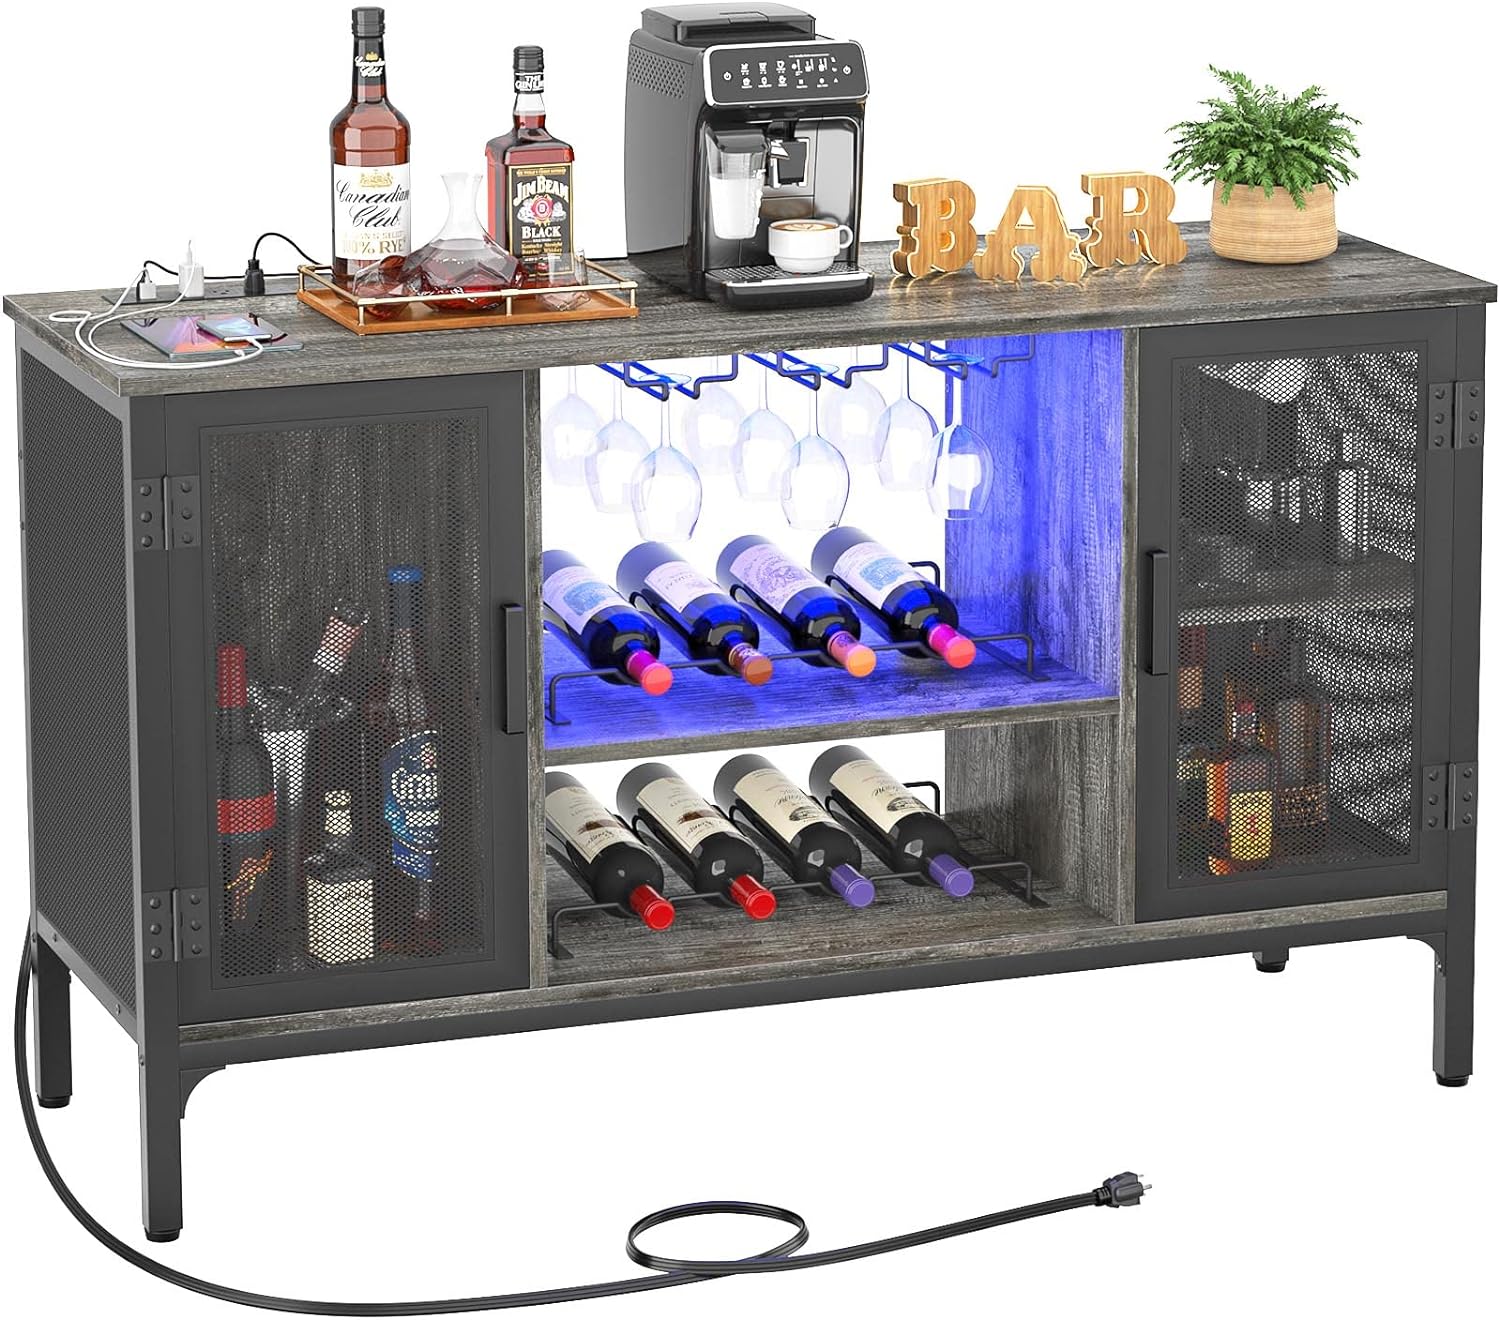 Homieasy Wine Bar Cabinet with Led Lights and Power Outlets, Industrial Coffee Bar Cabinet for Liquor and Glasses, Farmhouse Bar Cabinet with Removable Wine Racks, Black Oak